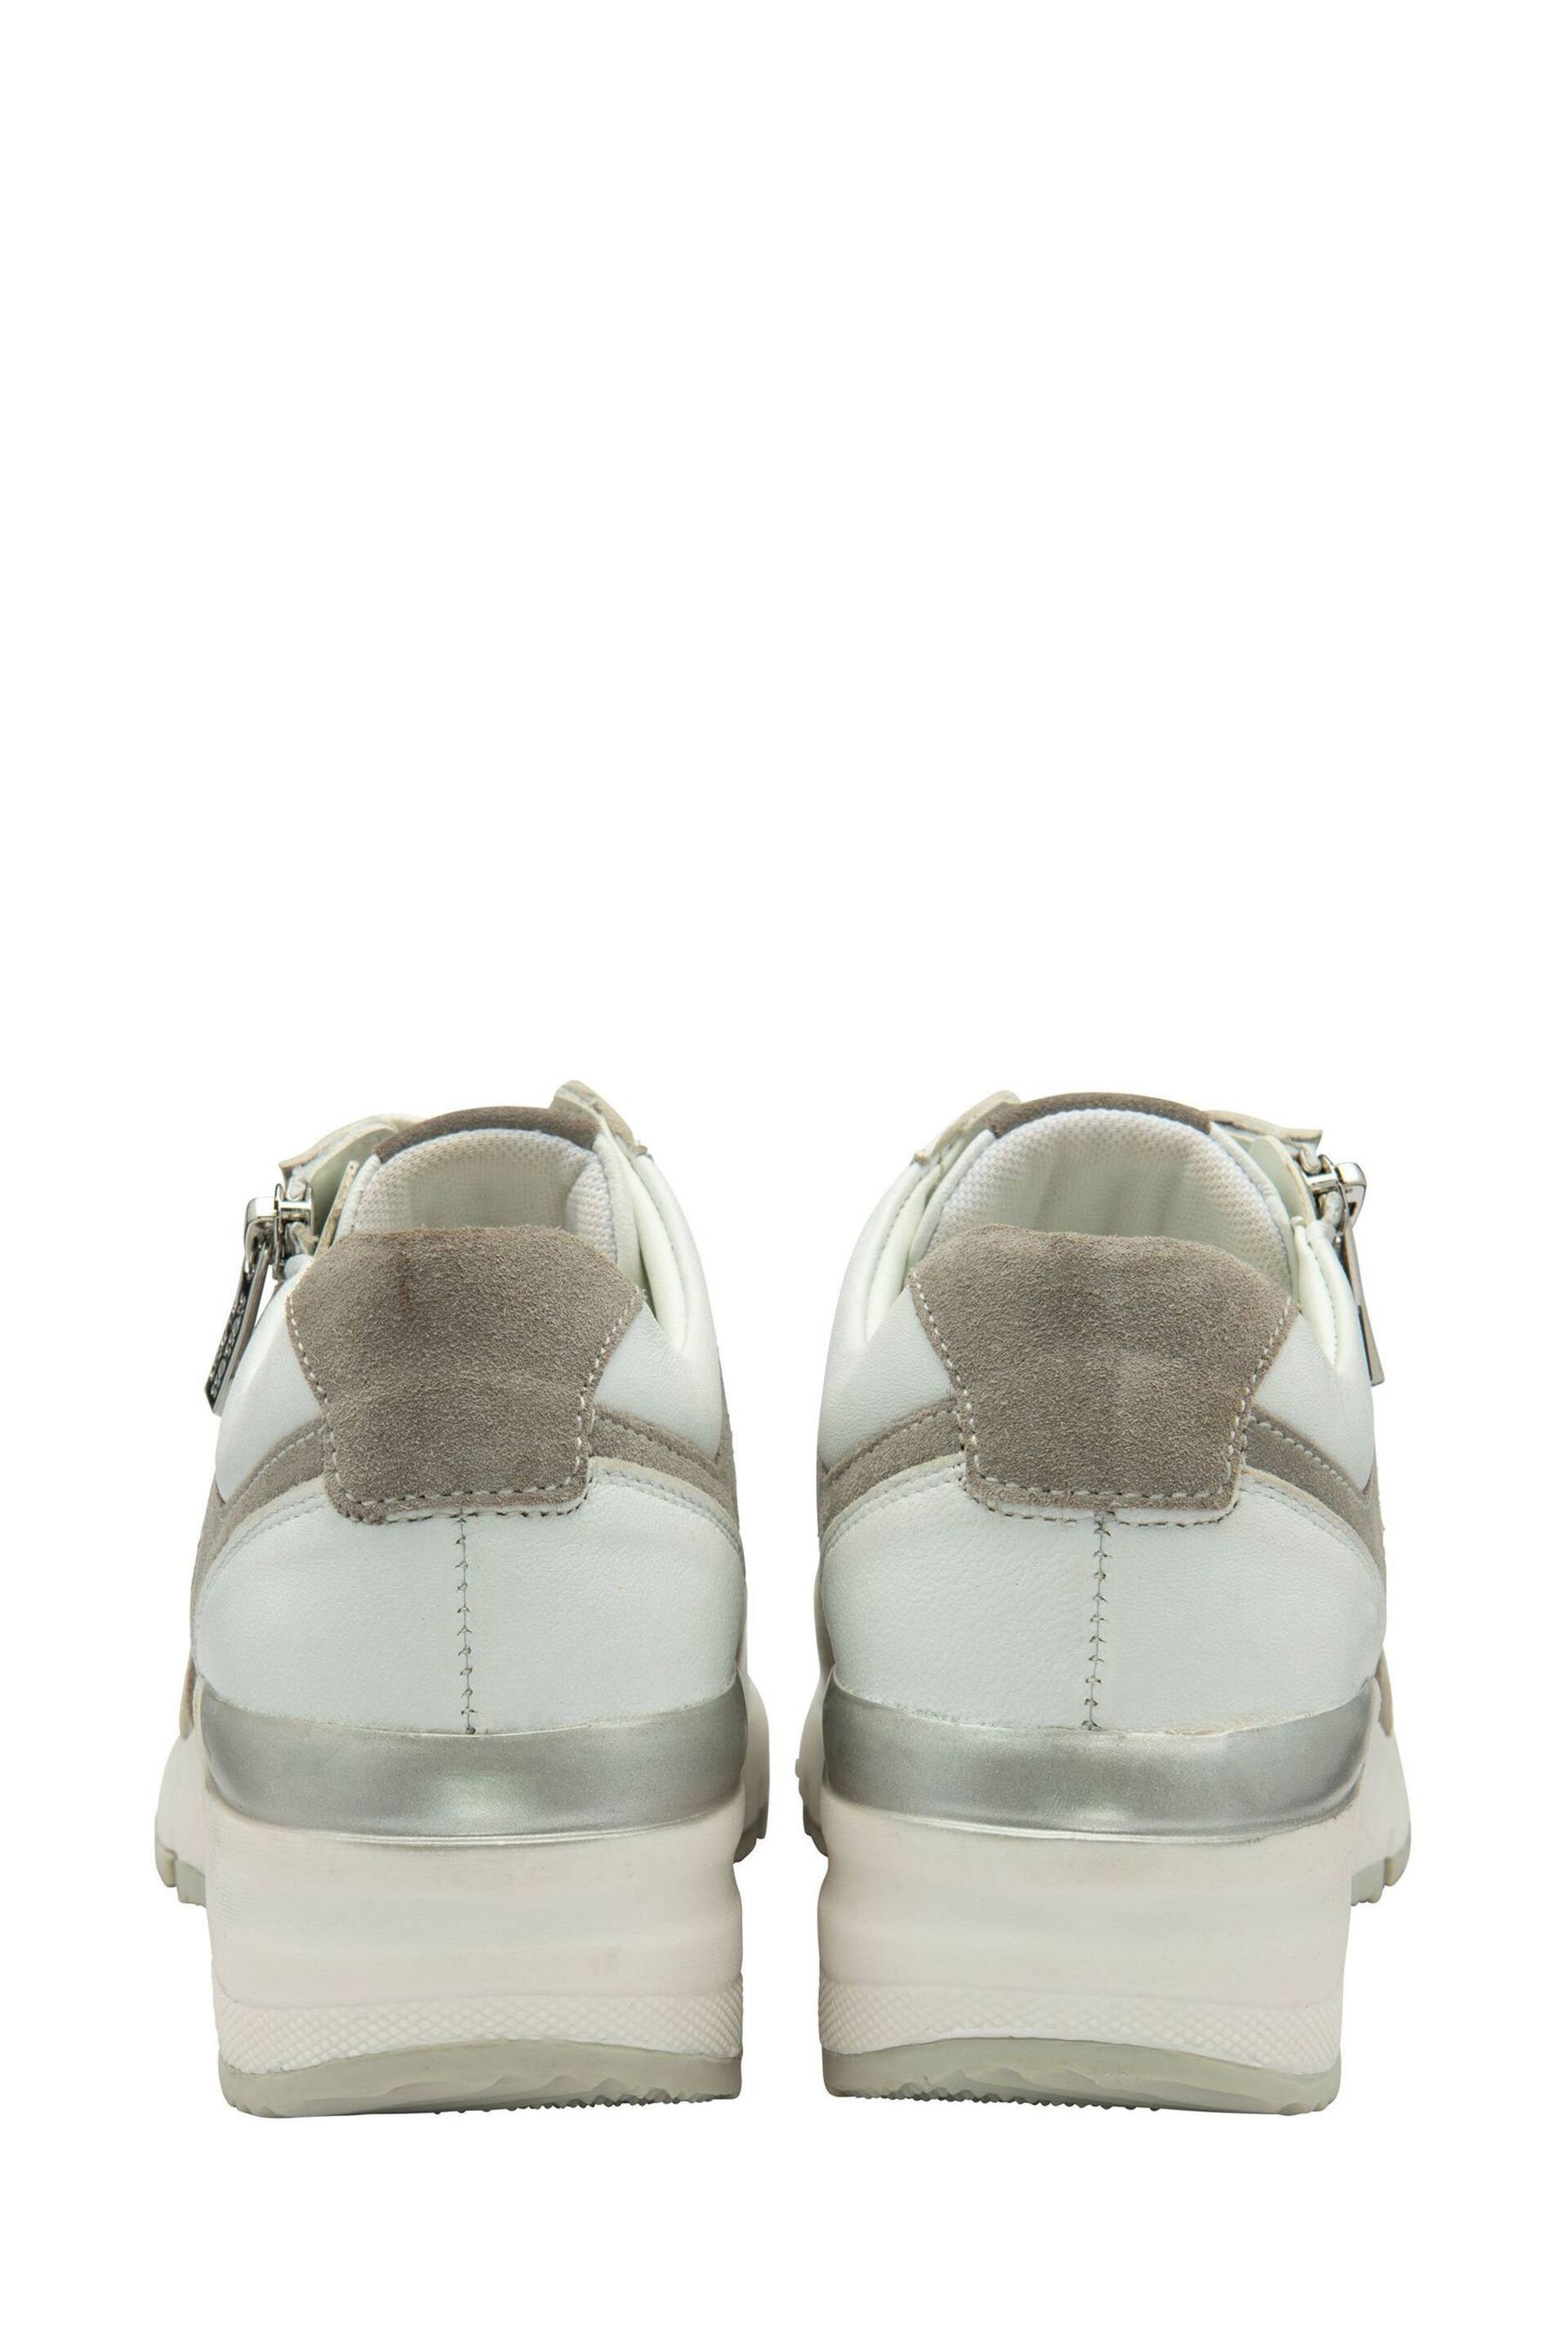 Lotus White Zip-Up Wedge Trainers - Image 3 of 4